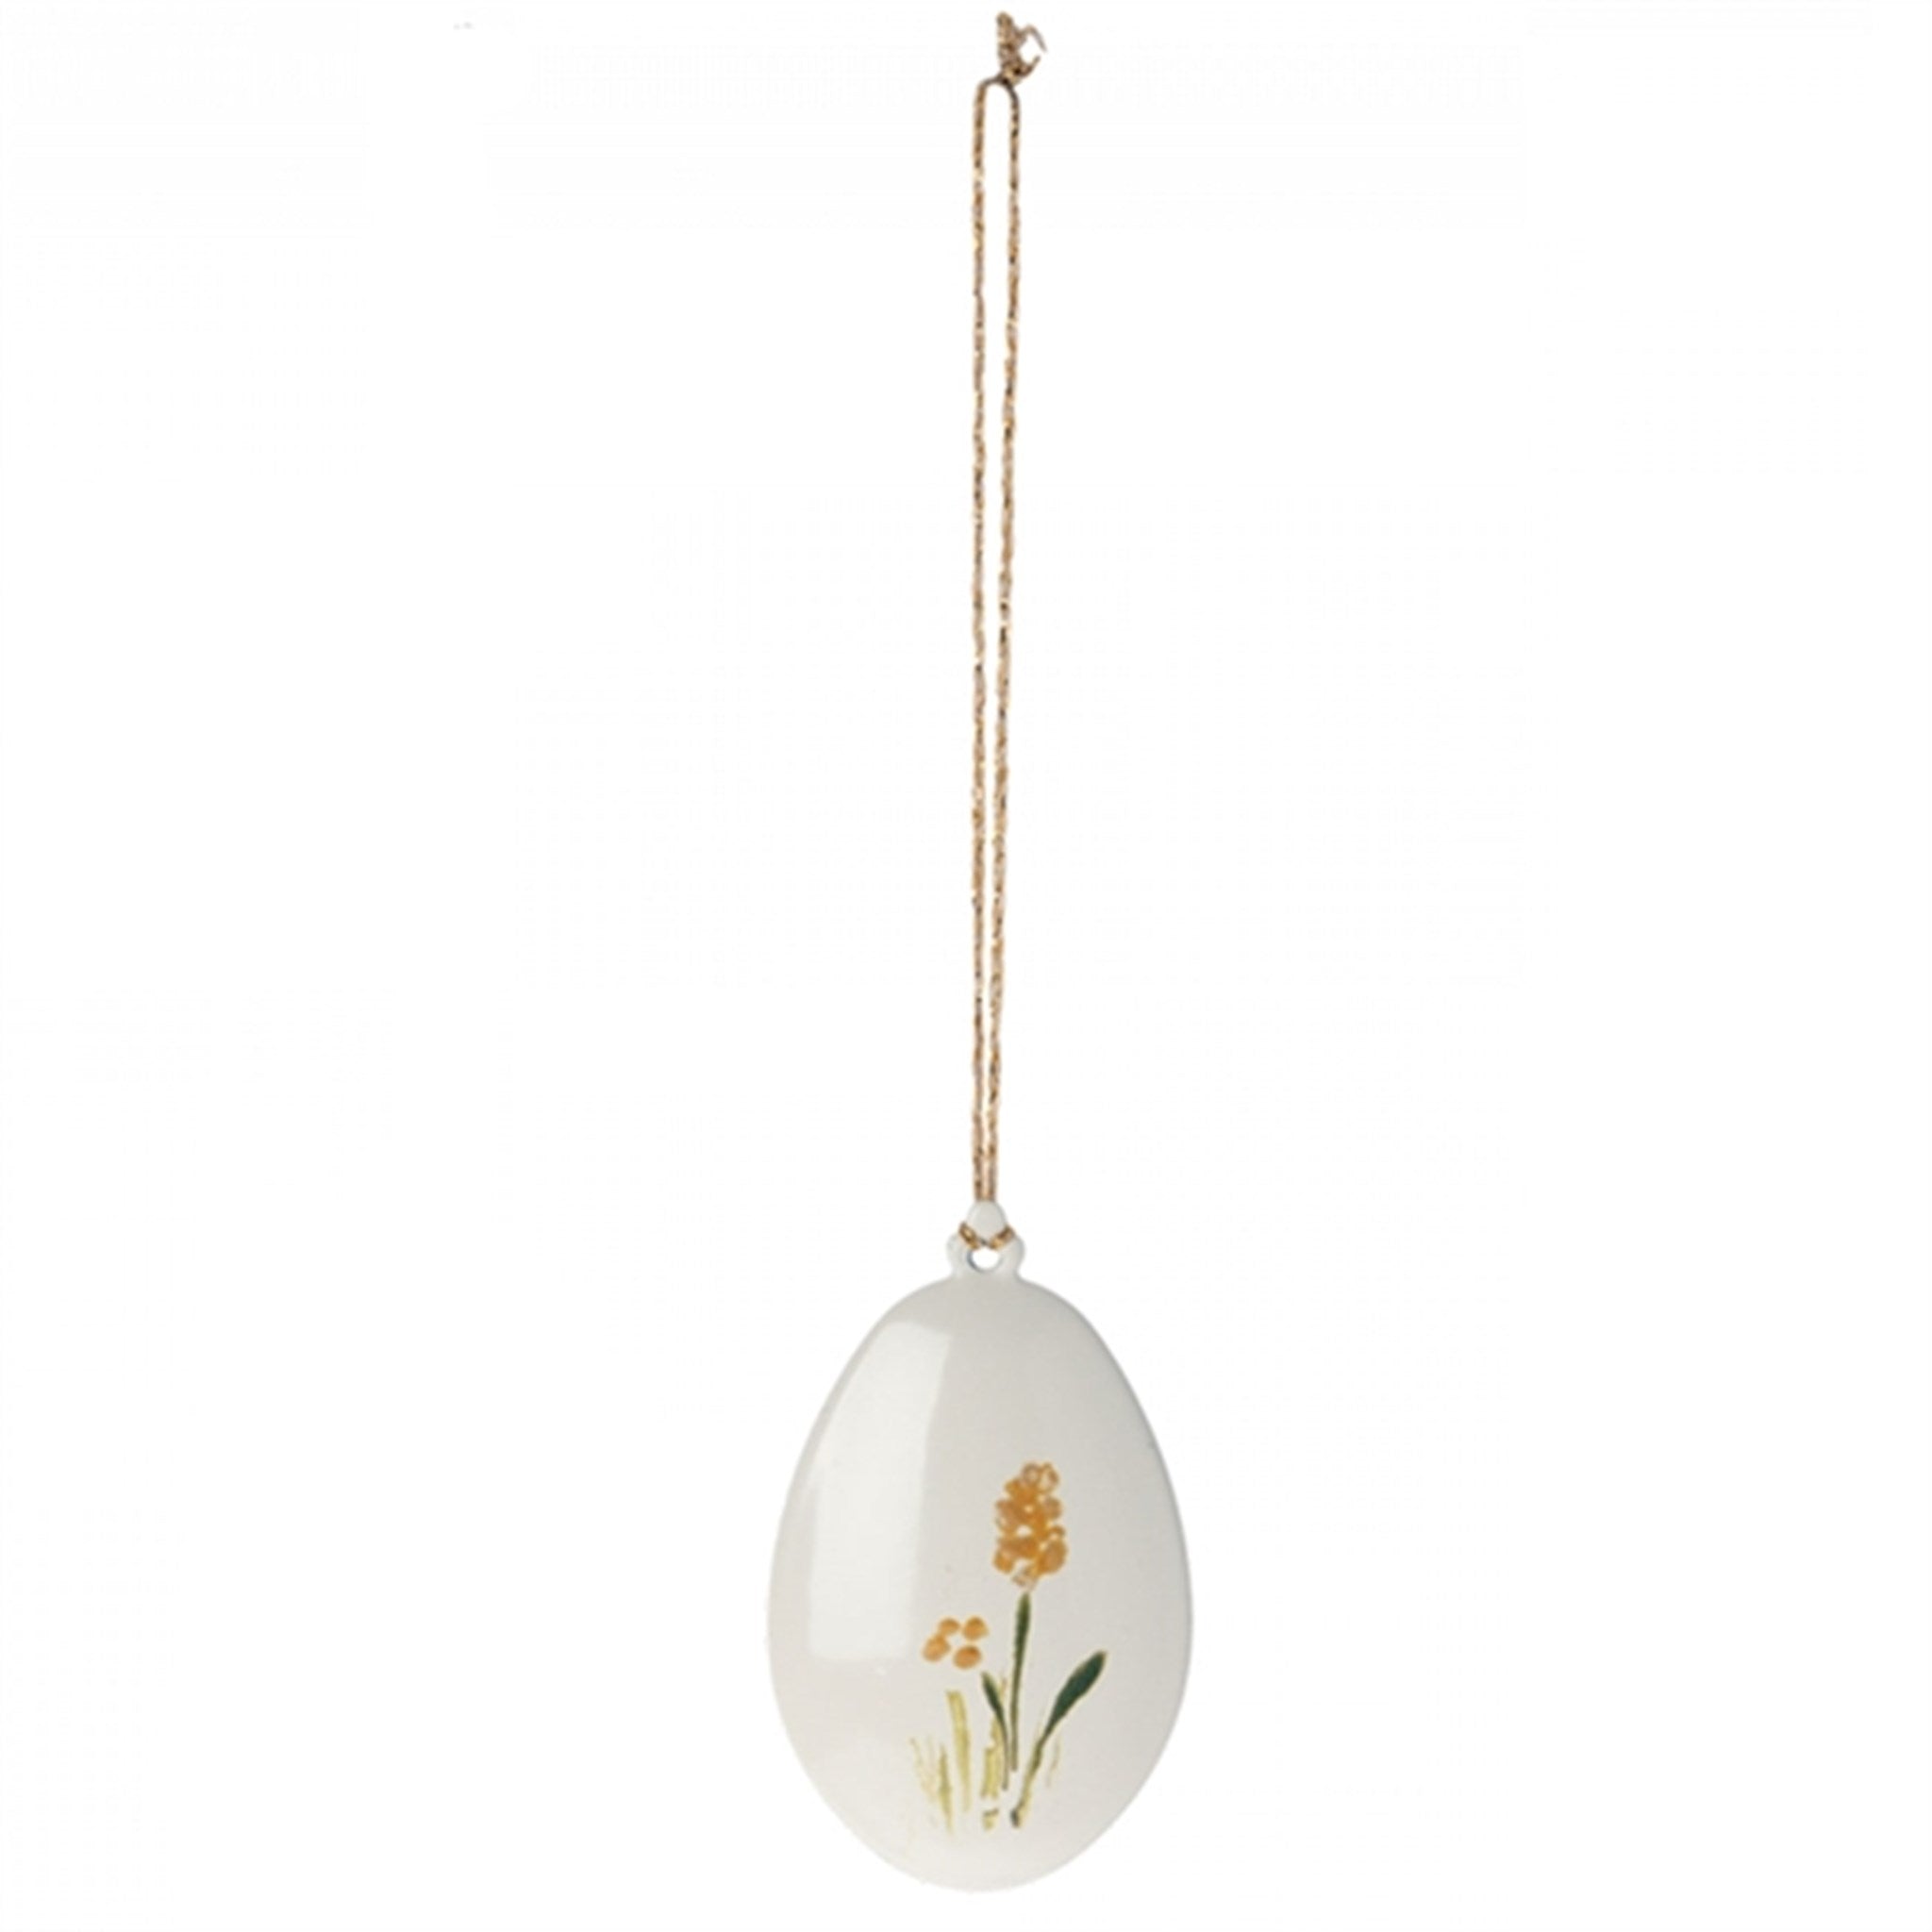 Maileg Easter Egg Ornament - Yellow Round